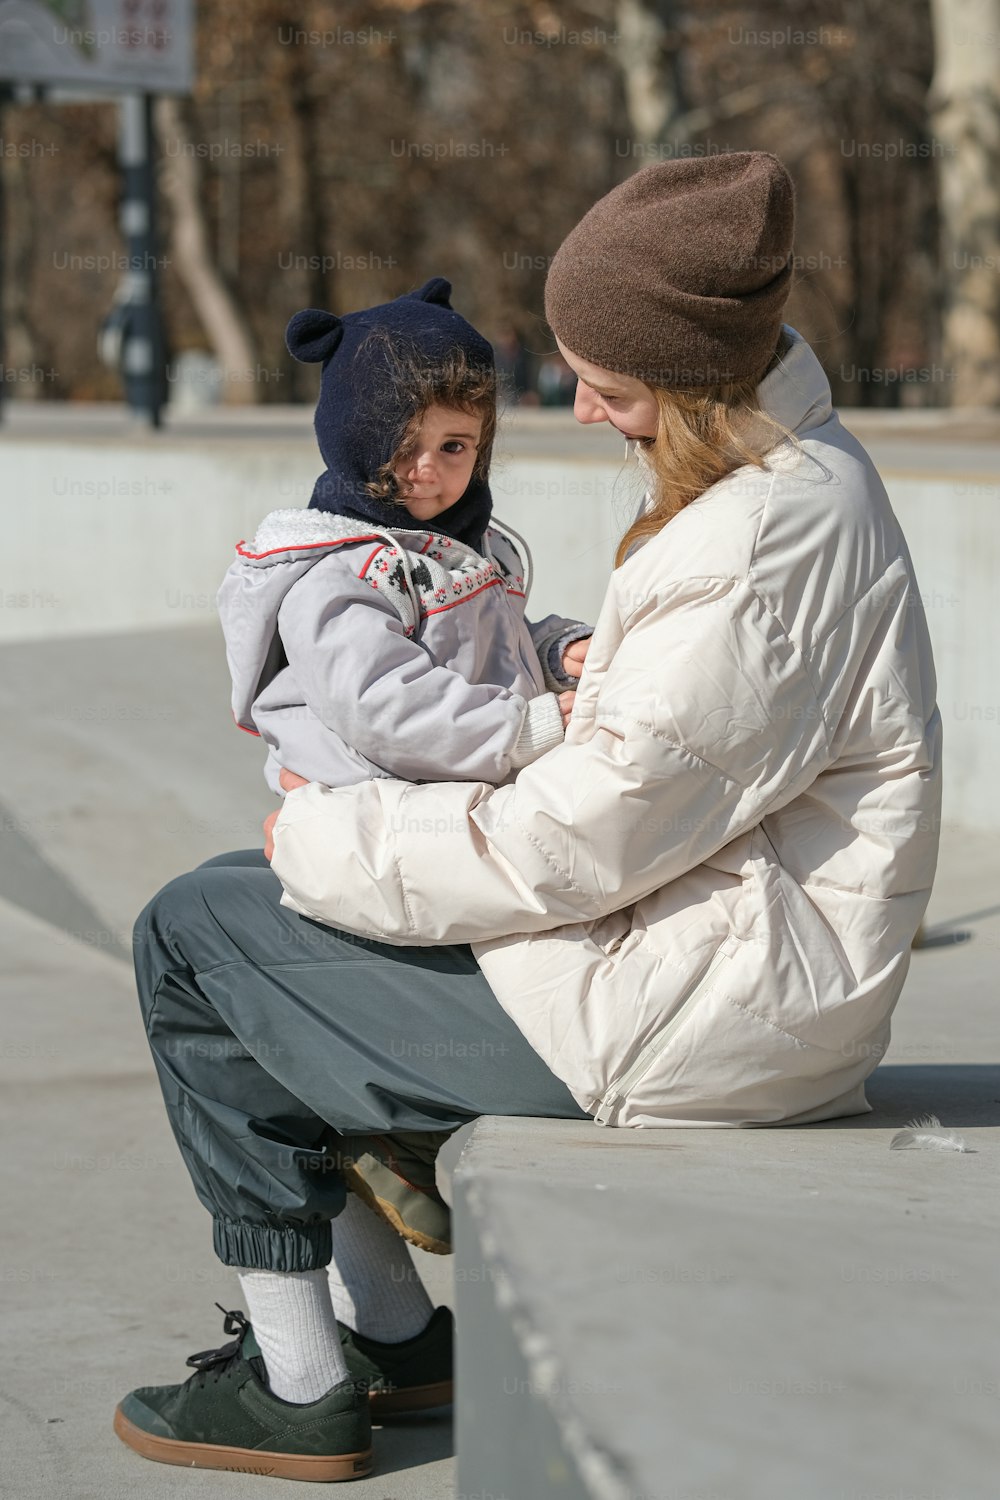 a woman and a child are sitting on a skateboard